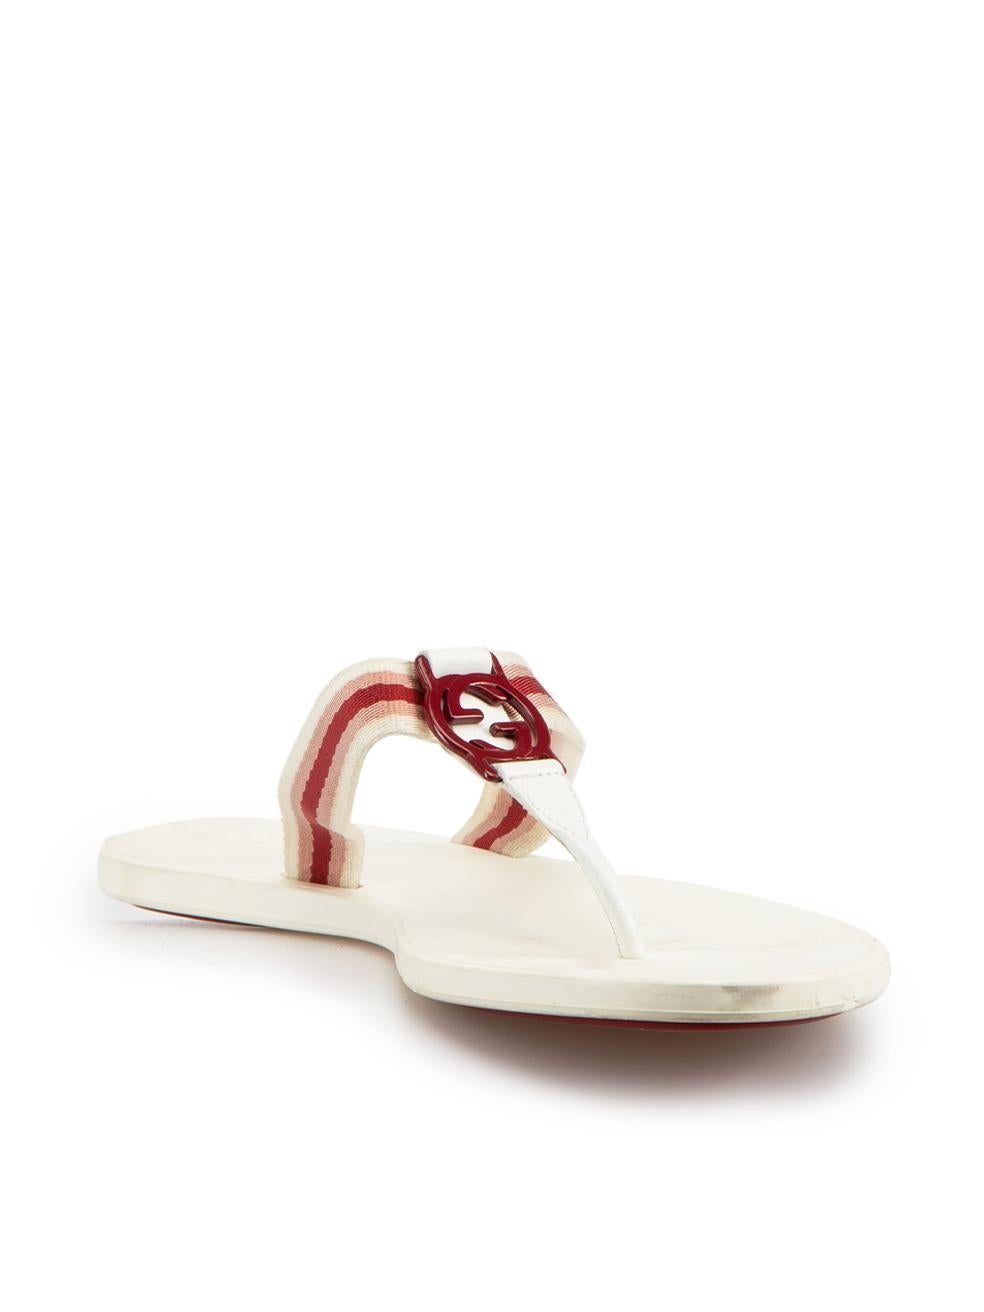 CONDITION is Good. Minor wear to sandals is evident. Light discoloured marks to inner sole and scuff marks to strap detail on this used Gucci designer resale item.



Details


White

Leather

Thong sandals

Red striped cloth straps

'GG' logo